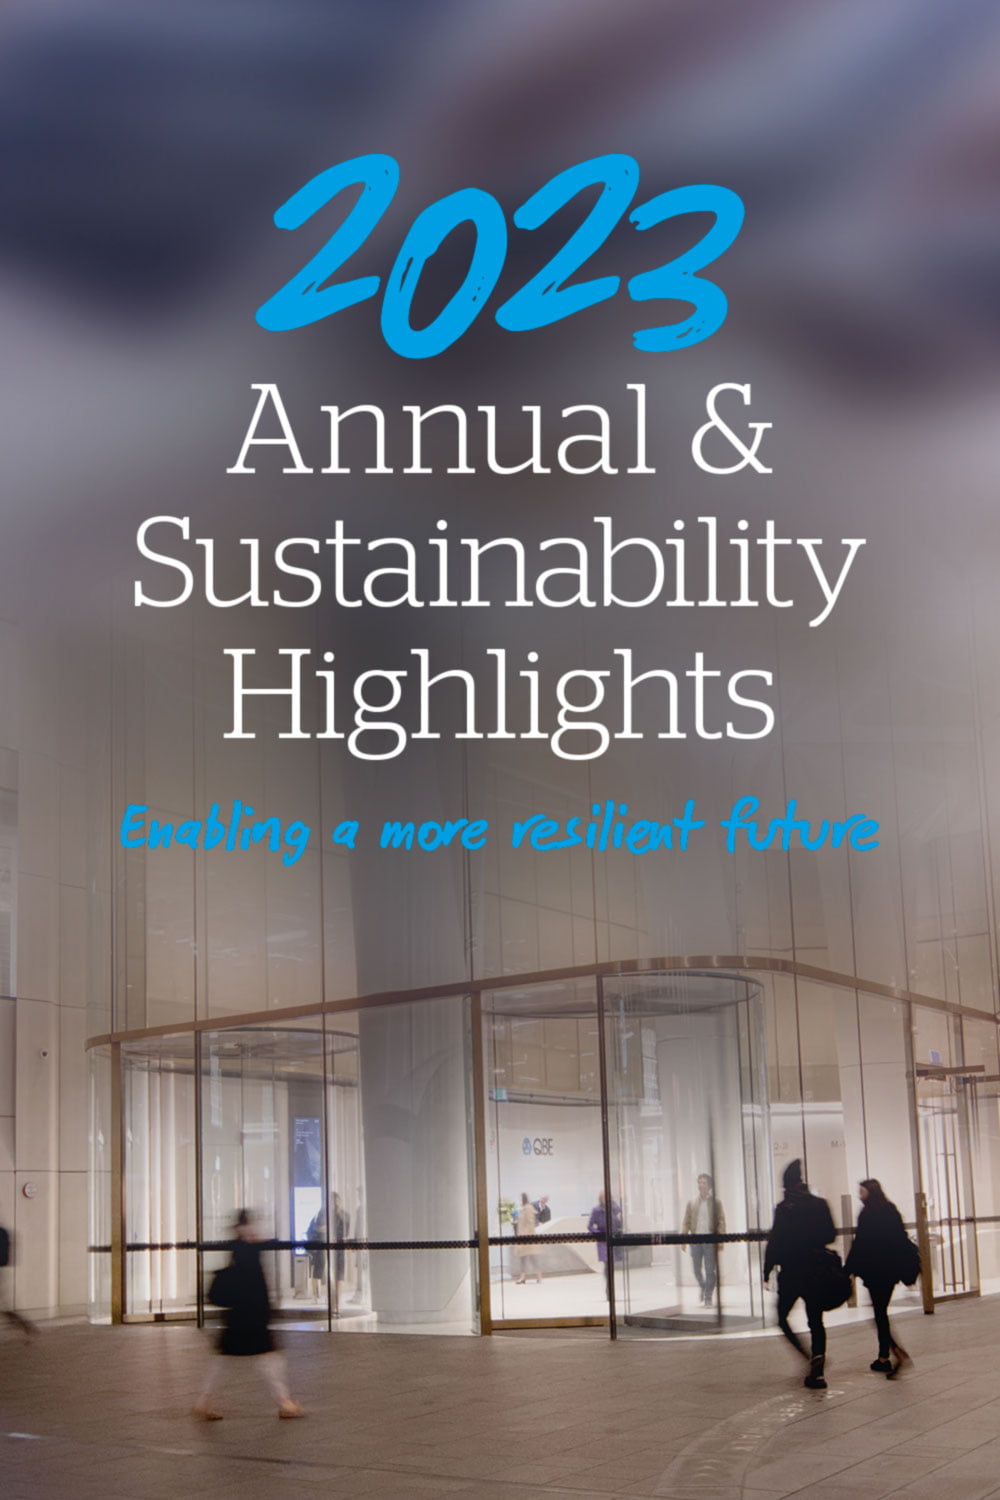 2022 Annual & Sustainability Highlights - enabling a more resilient future